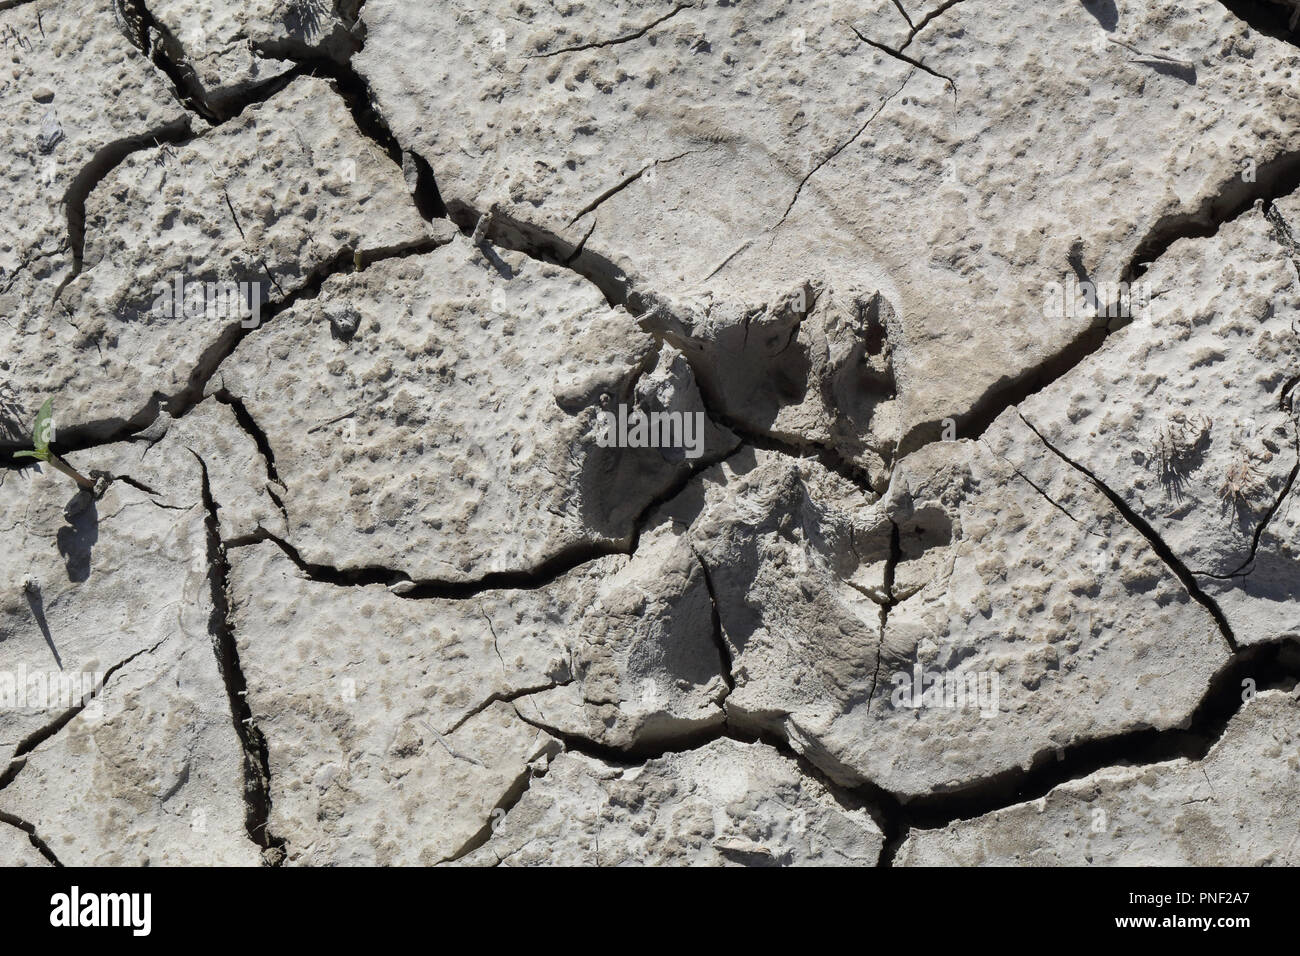 A dog footprint on an dry cracked grey clay soil during a hot sunny day in the Mediano artifical lake in the Spanish Aragonese Pyrenees Stock Photo